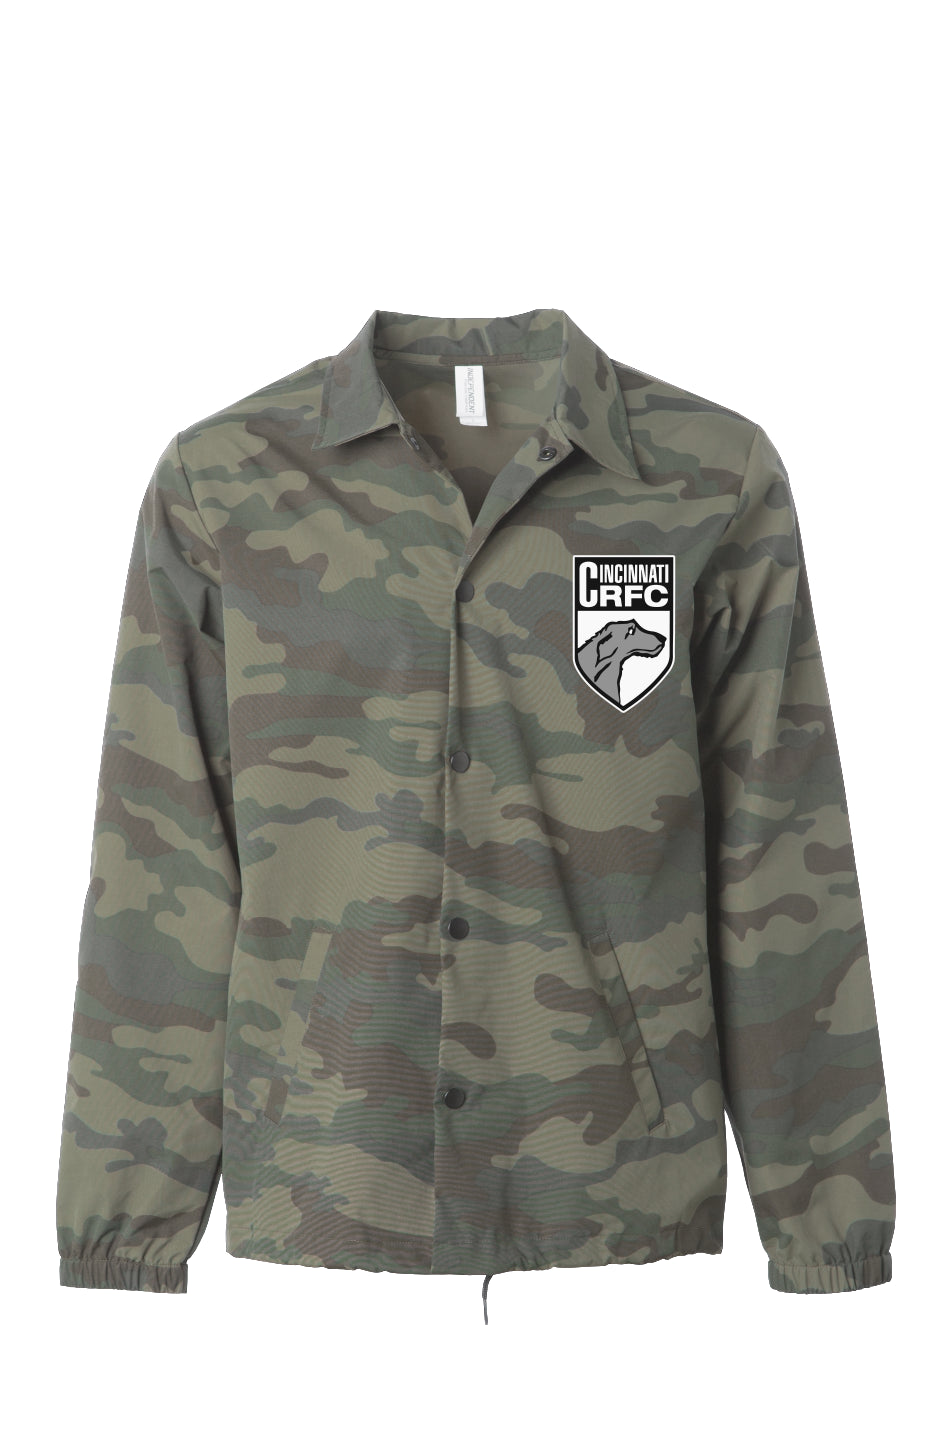 Water Resistant Windbreaker Camo | CRFC Wolfhounds Crest White